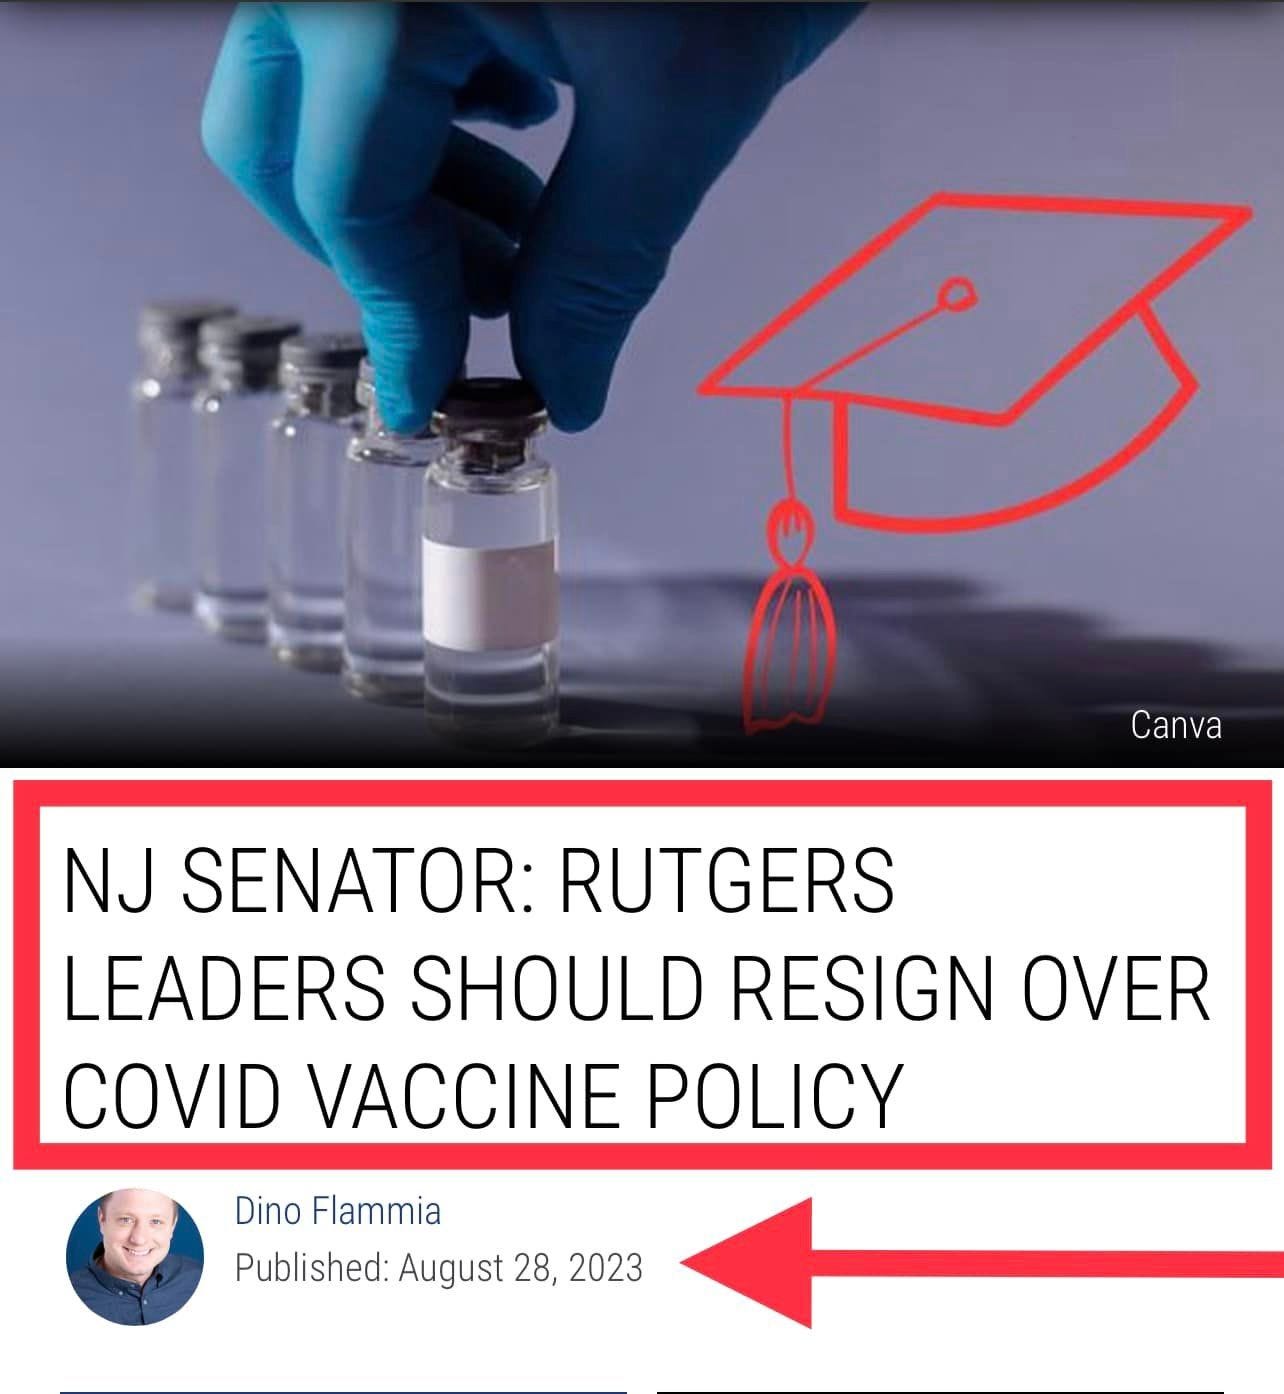 May be an image of 1 person and text that says 'Canva NJ SENATOR: RUTGERS LEADERS SHOULD RESIGN OVER COVID VACCINE POLICY Dino Flammia Published: August 28, 2023'